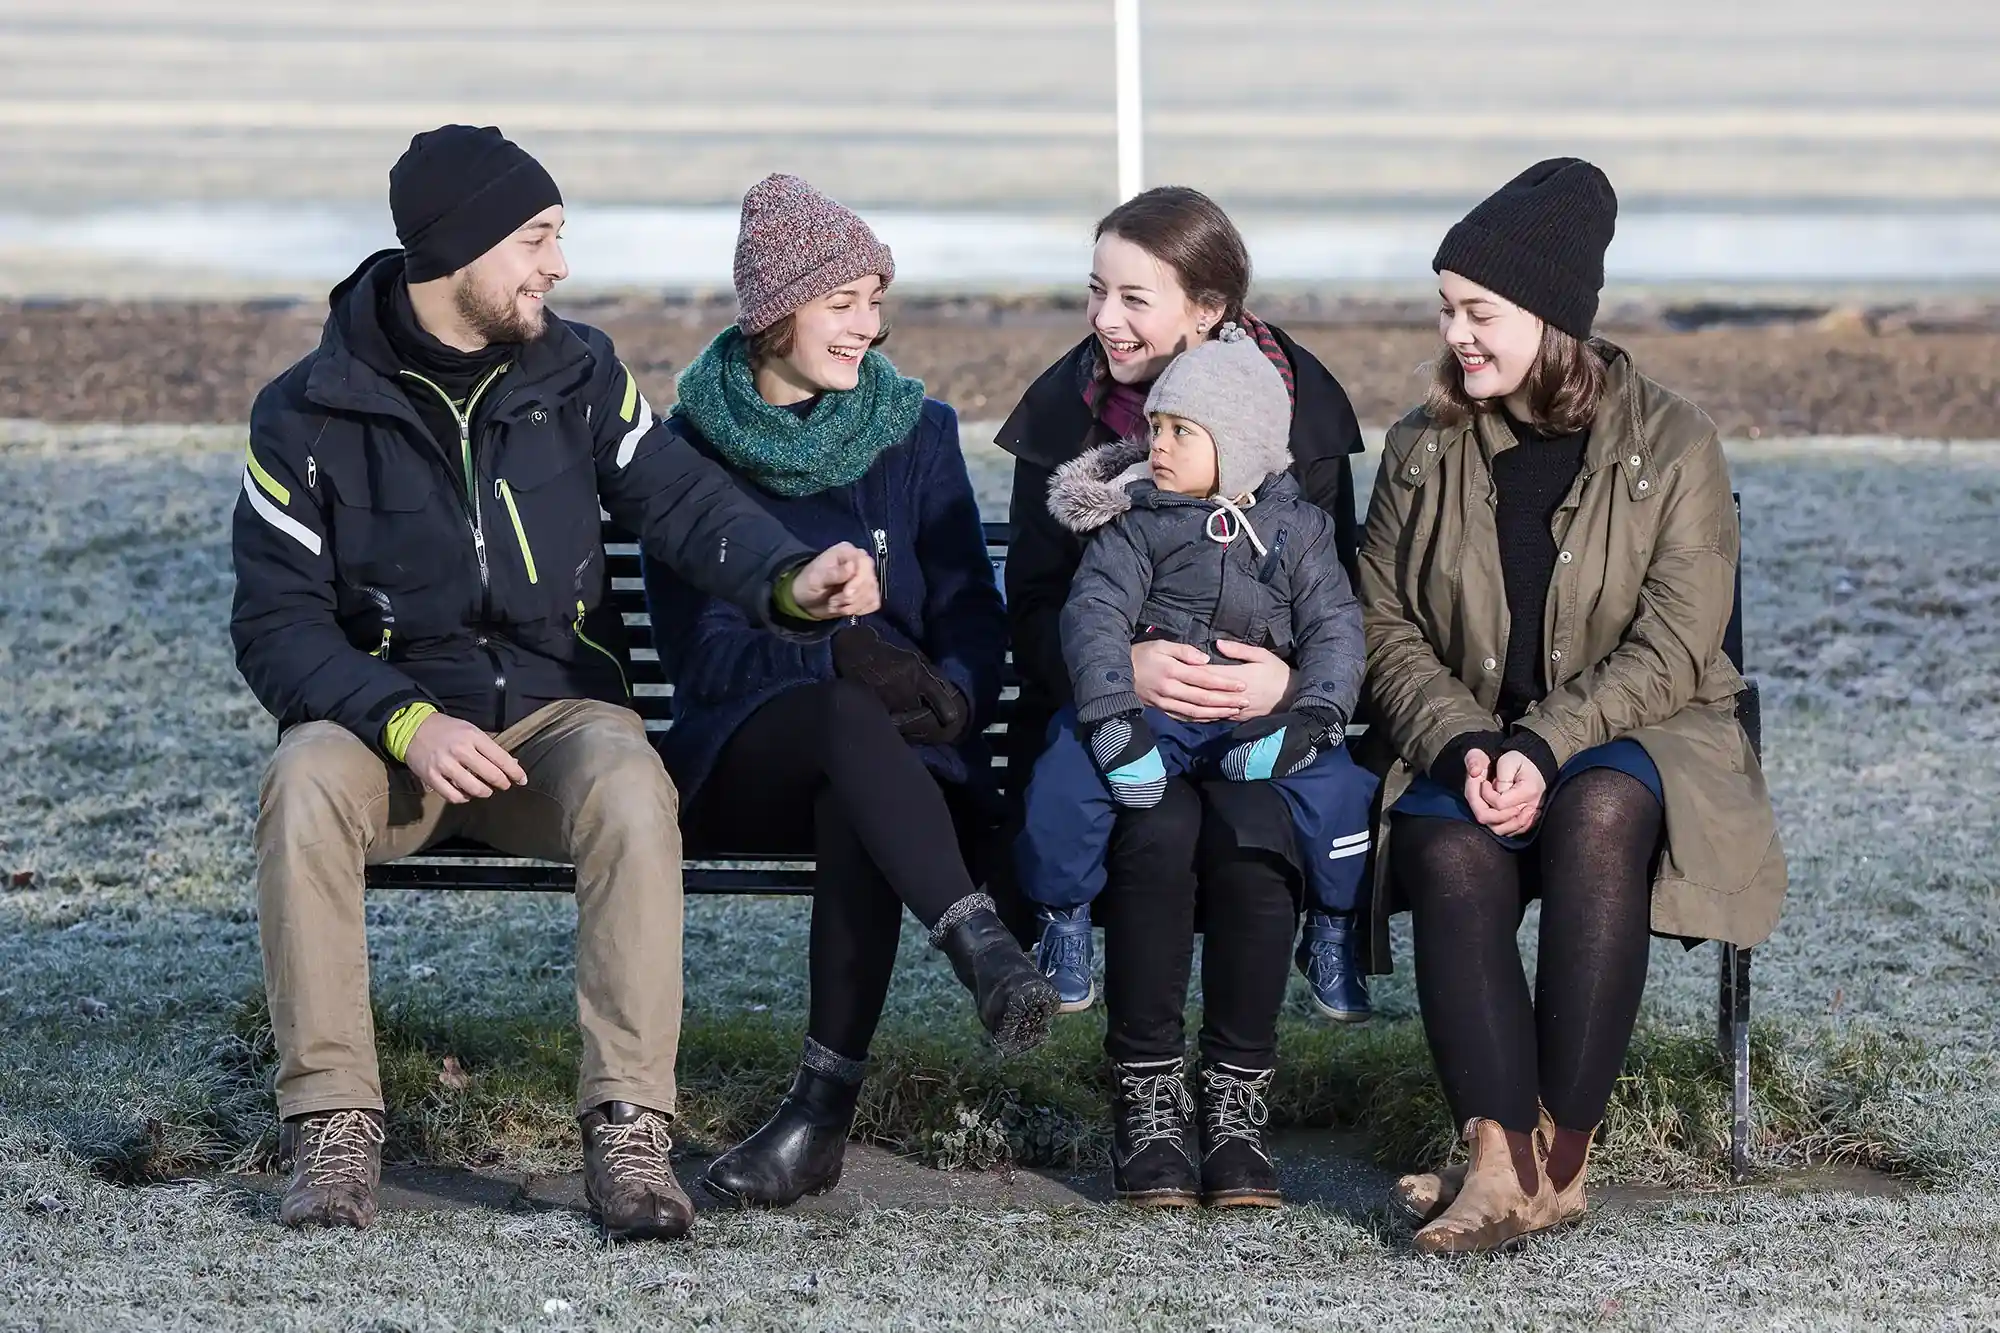 Five people, including one young child, sitting on a bench outdoors during winter. All are dressed in winter clothing, smiling and engaged in conversation.